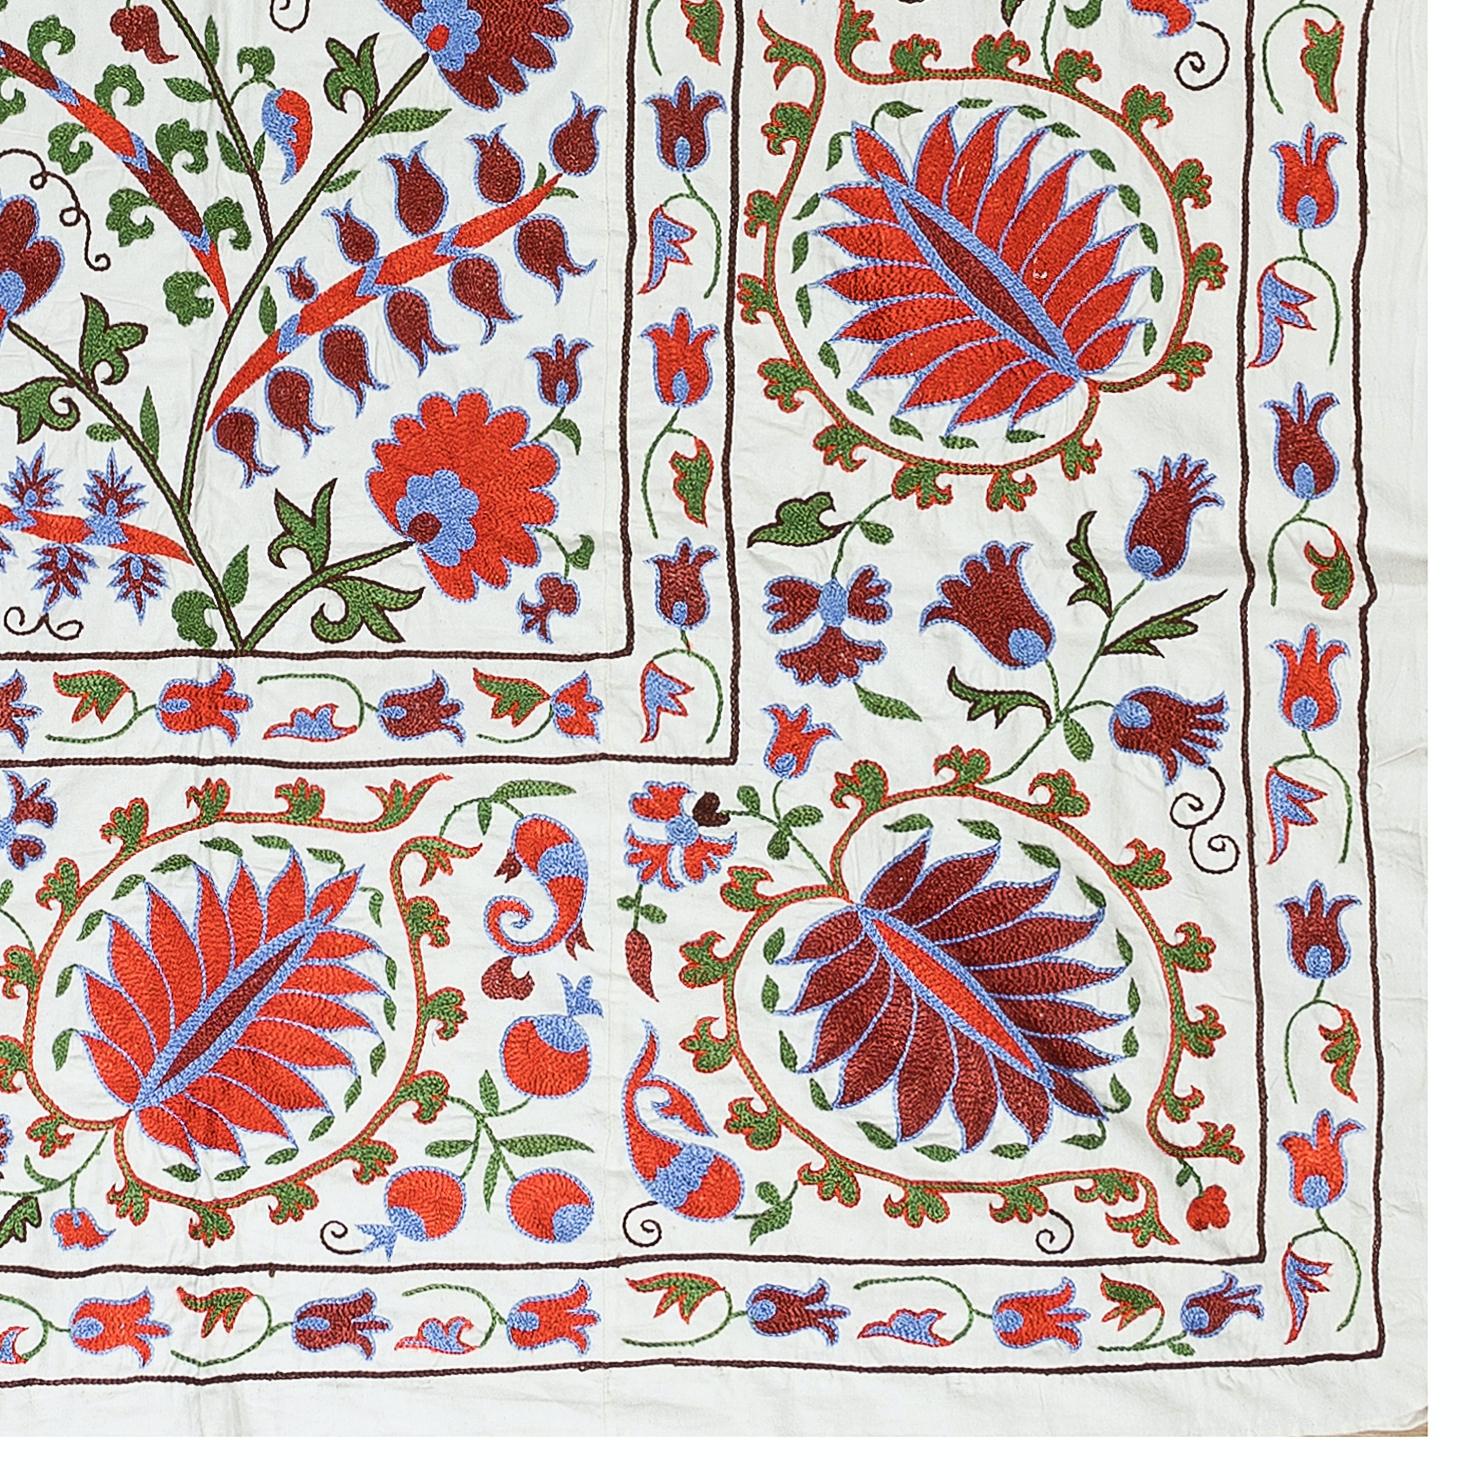 Uzbek 4.5x6.9 Ft Silk Embroidery Wall Hanging, Boho Wall Decor, Needlework Tapestry For Sale